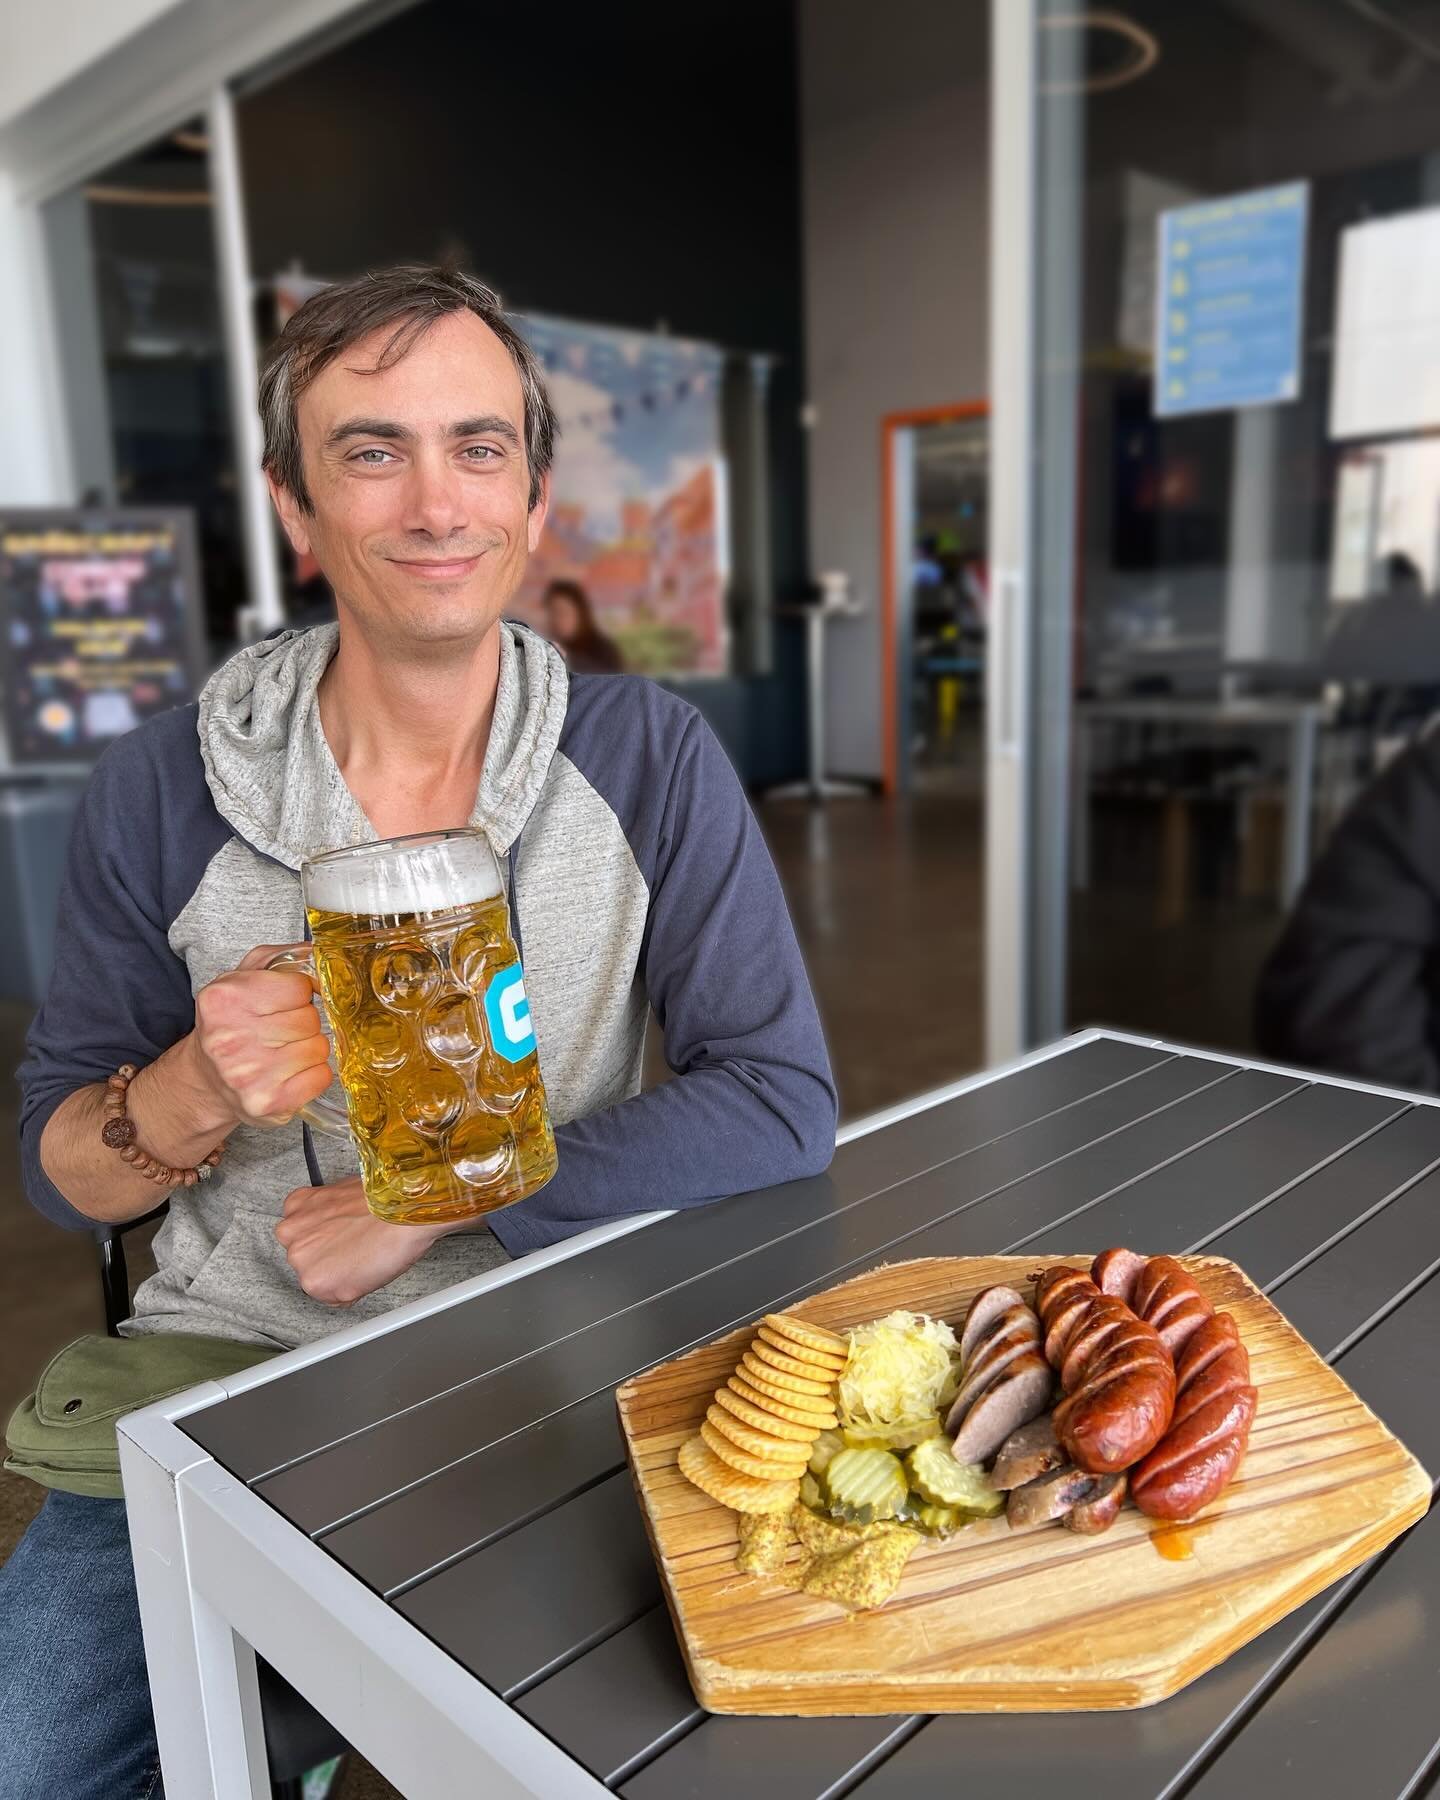 🌭 Sizzle up your spring with a sausage platter during Fr&uuml;hlingsfest! 🍻

Whether you&rsquo;re craving a hearty feast or looking for a perfect snack to pair with your crisp spring lagers, we&rsquo;ve got you covered until May 20th!

PLUS NEW SPE